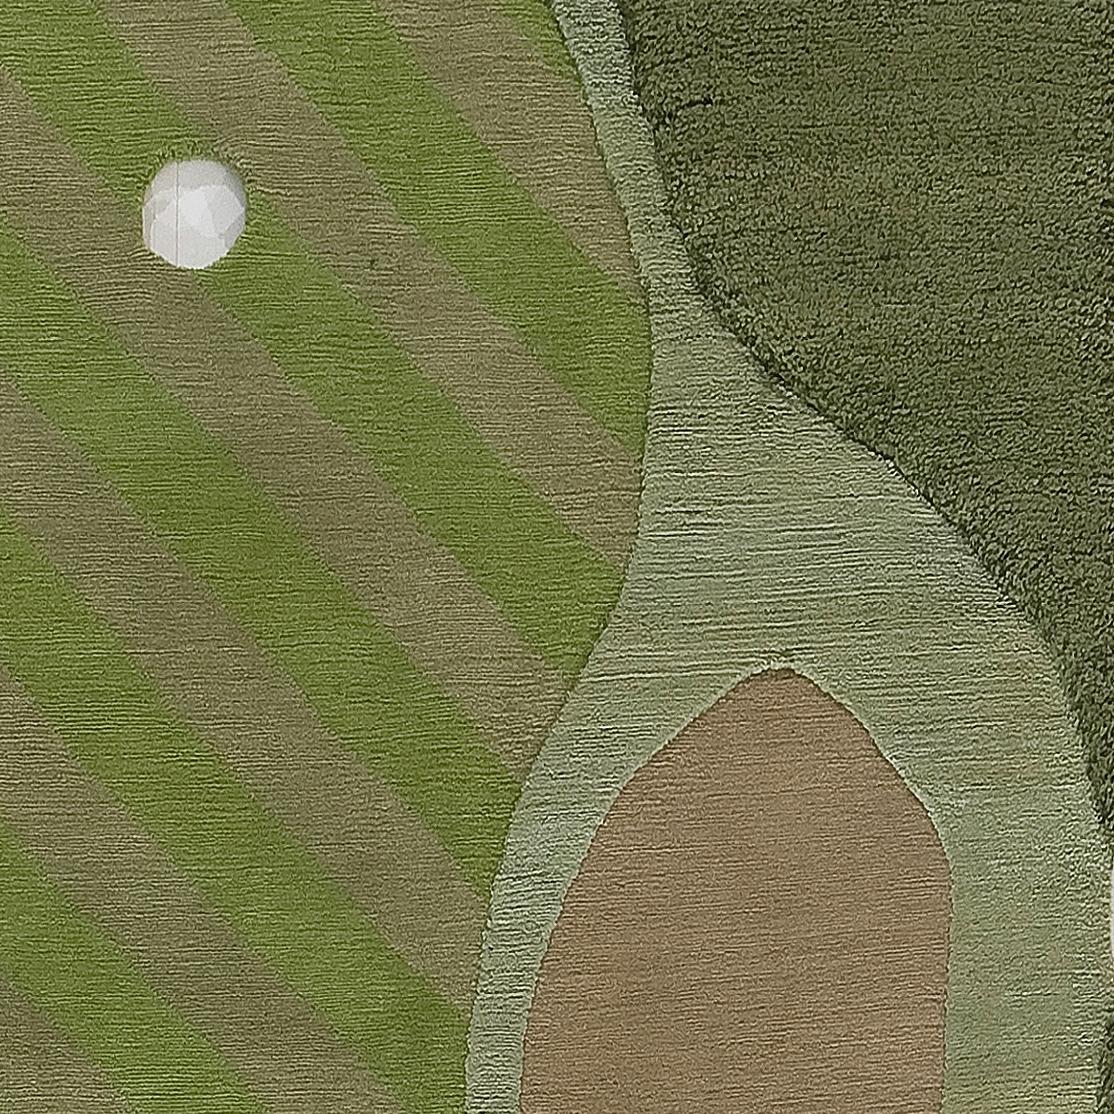 Hole in 1 by Illulian Design Studio. Illulian takes you on a golf course in a fun carpet suitable for those who love to live life with irony.
This rug is hand knotted in Nepal by our artisans by using 50% silk and 50% fine Himalayan wool dyed using